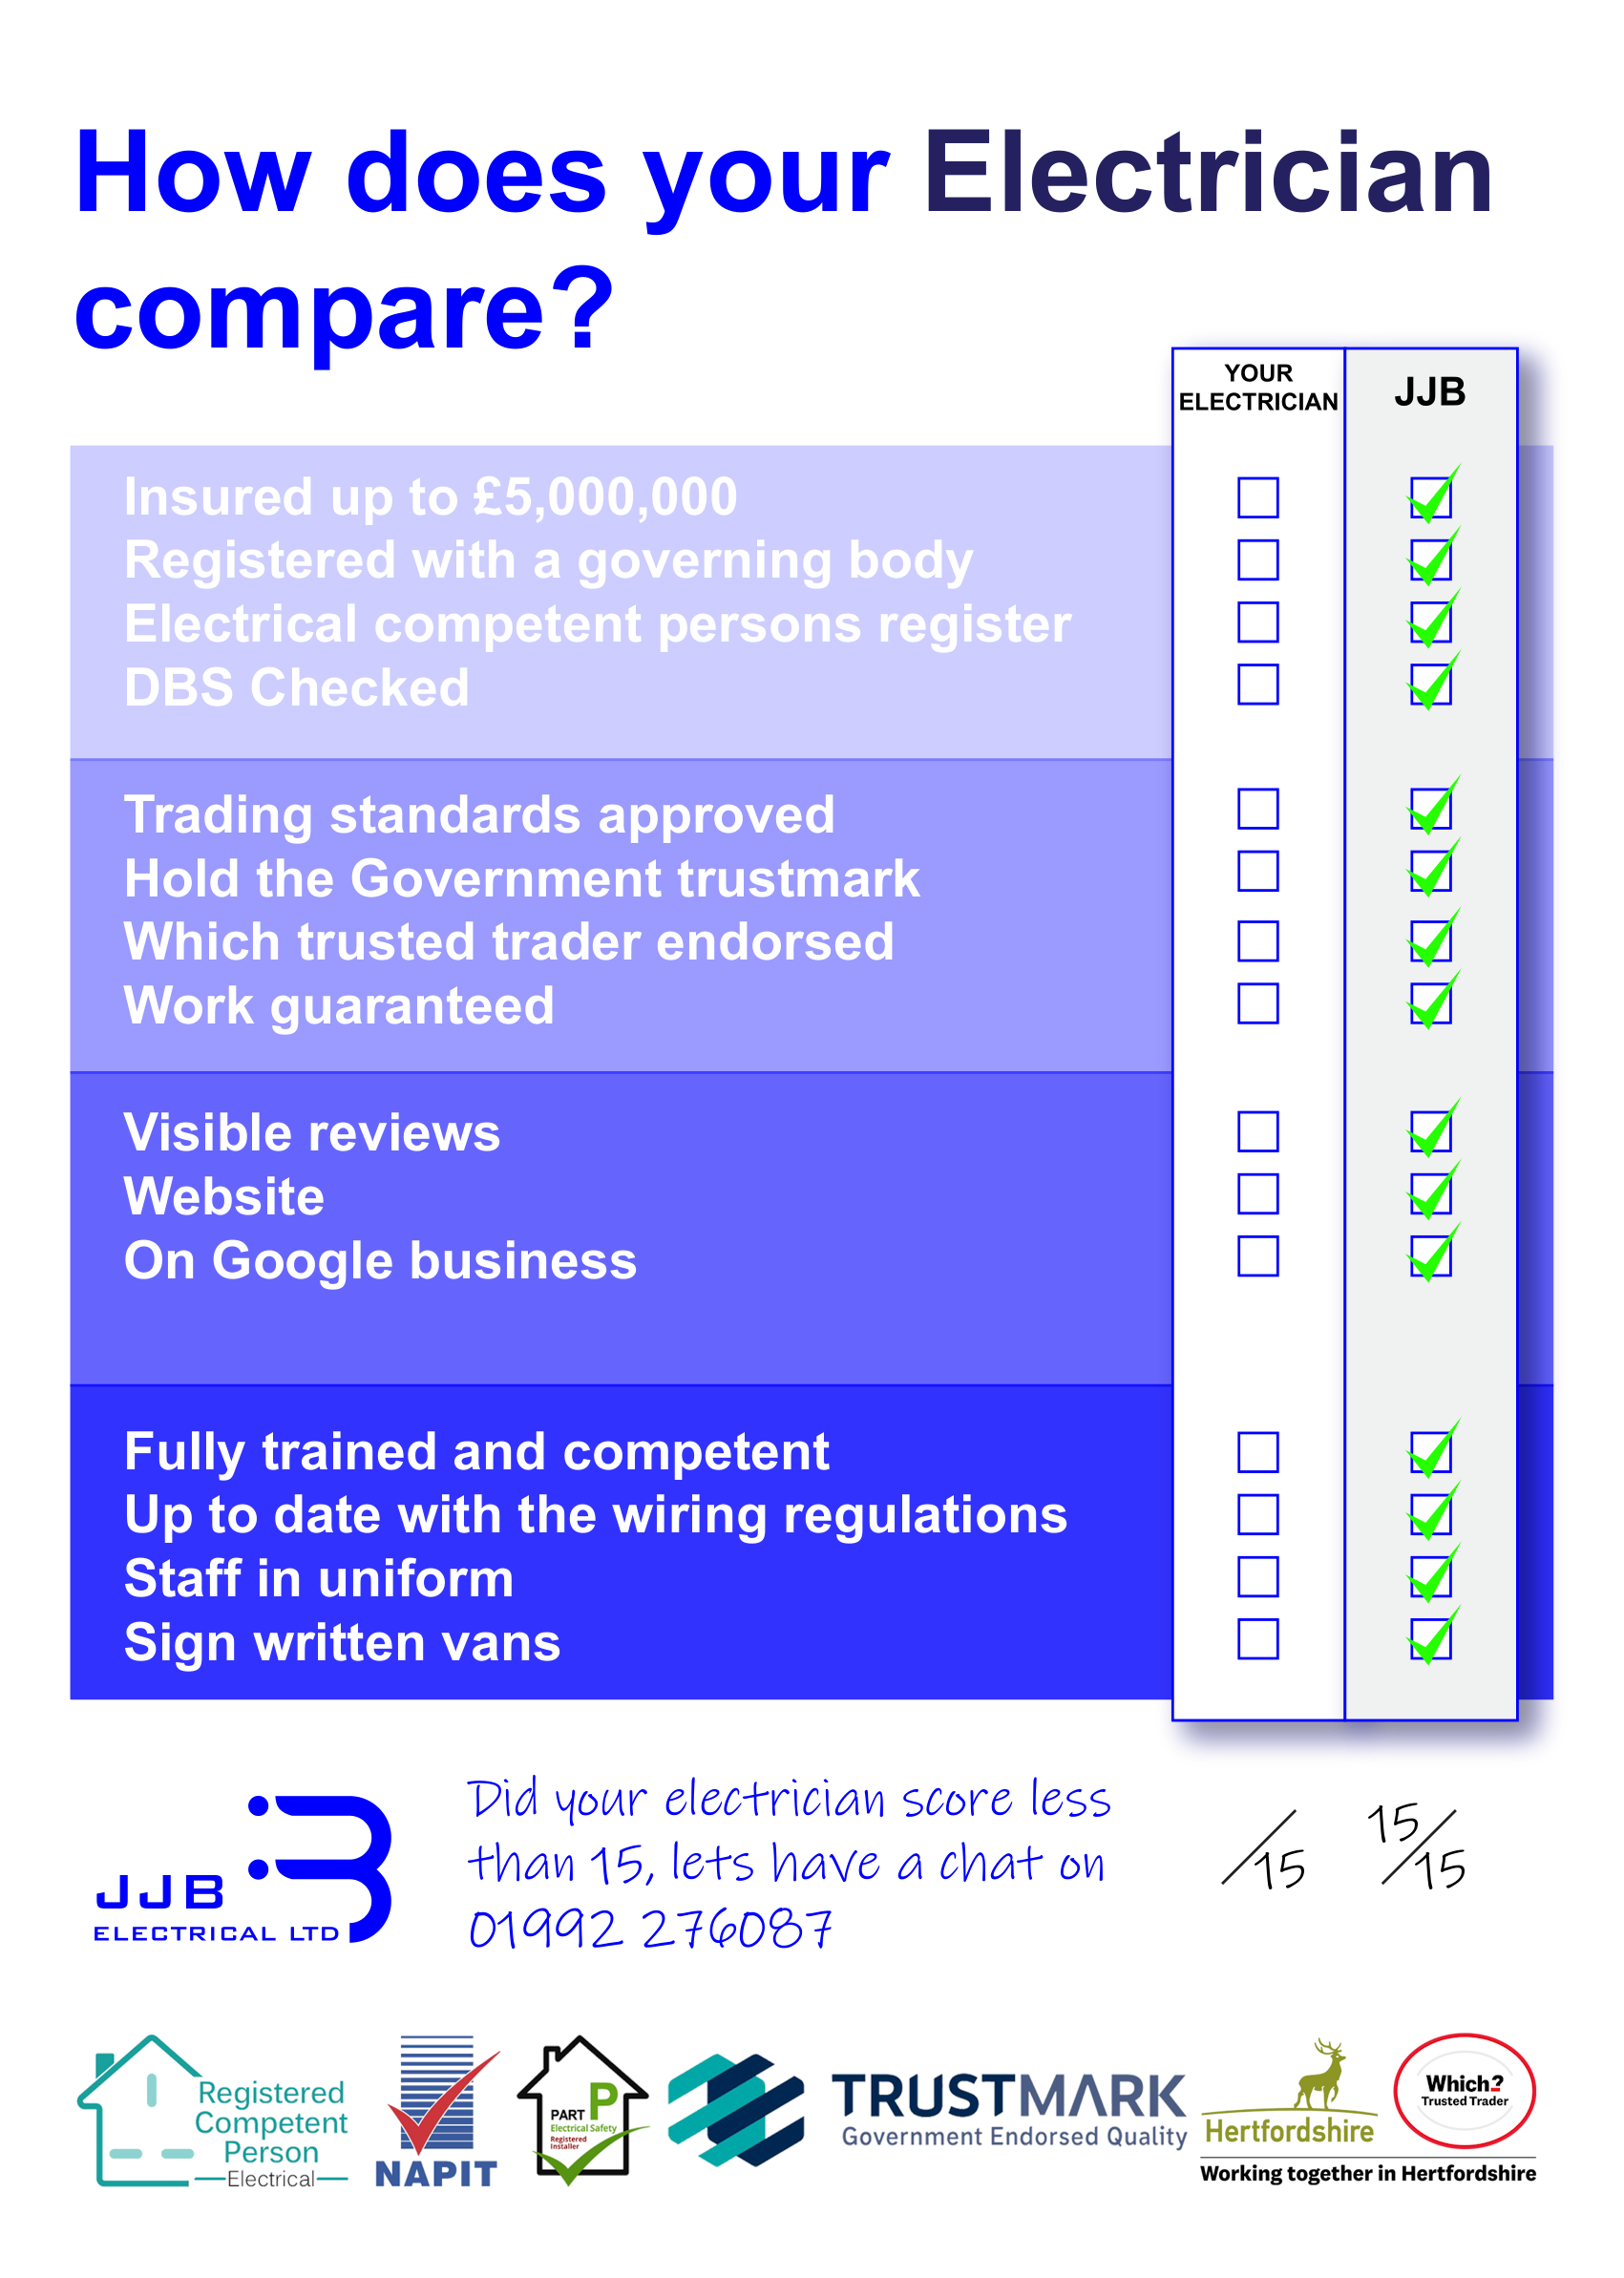 How does your Electrician compare?